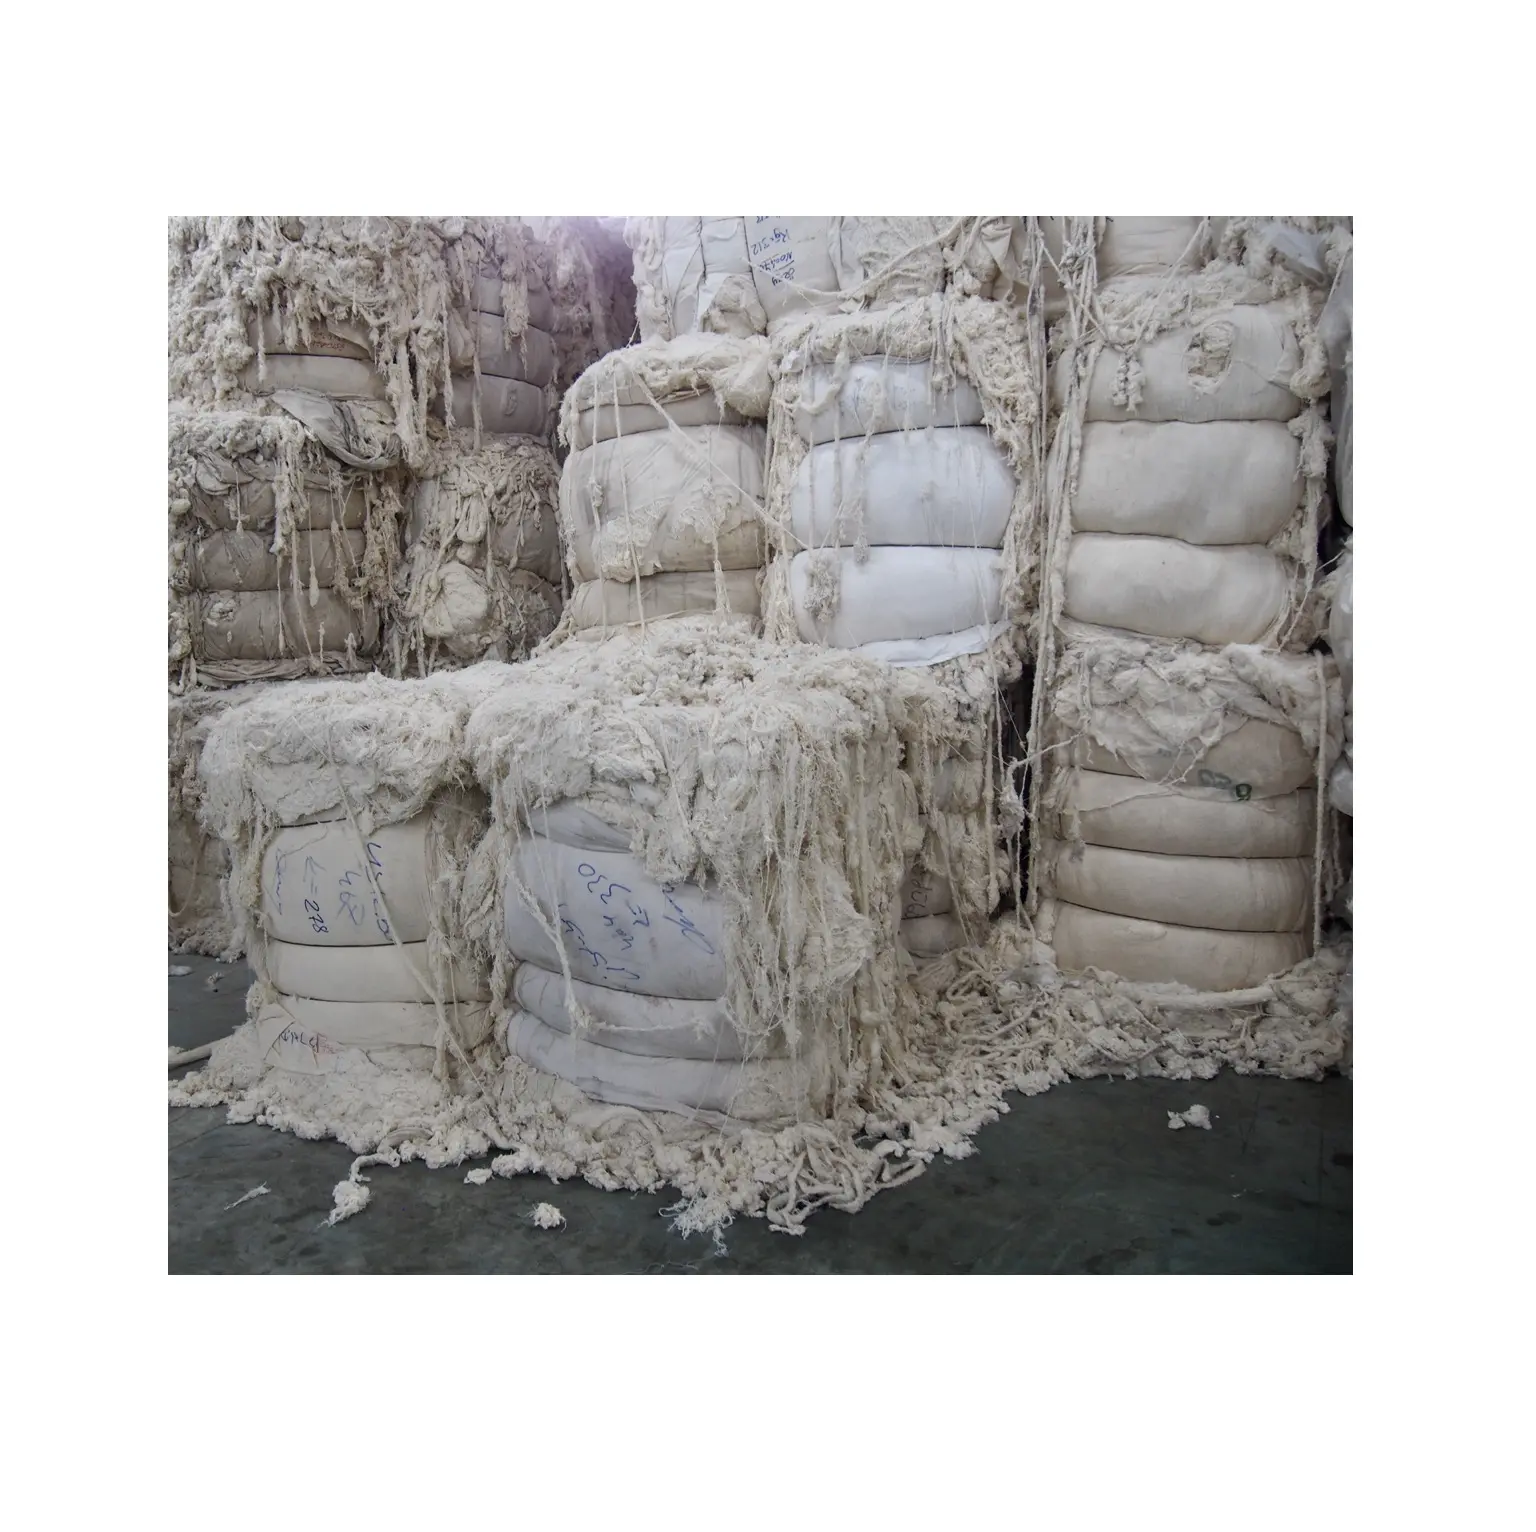 Hot Selling Wholesale Cheap Price Raw Cotton Waste / Cotton Yarn Waste in Bulk